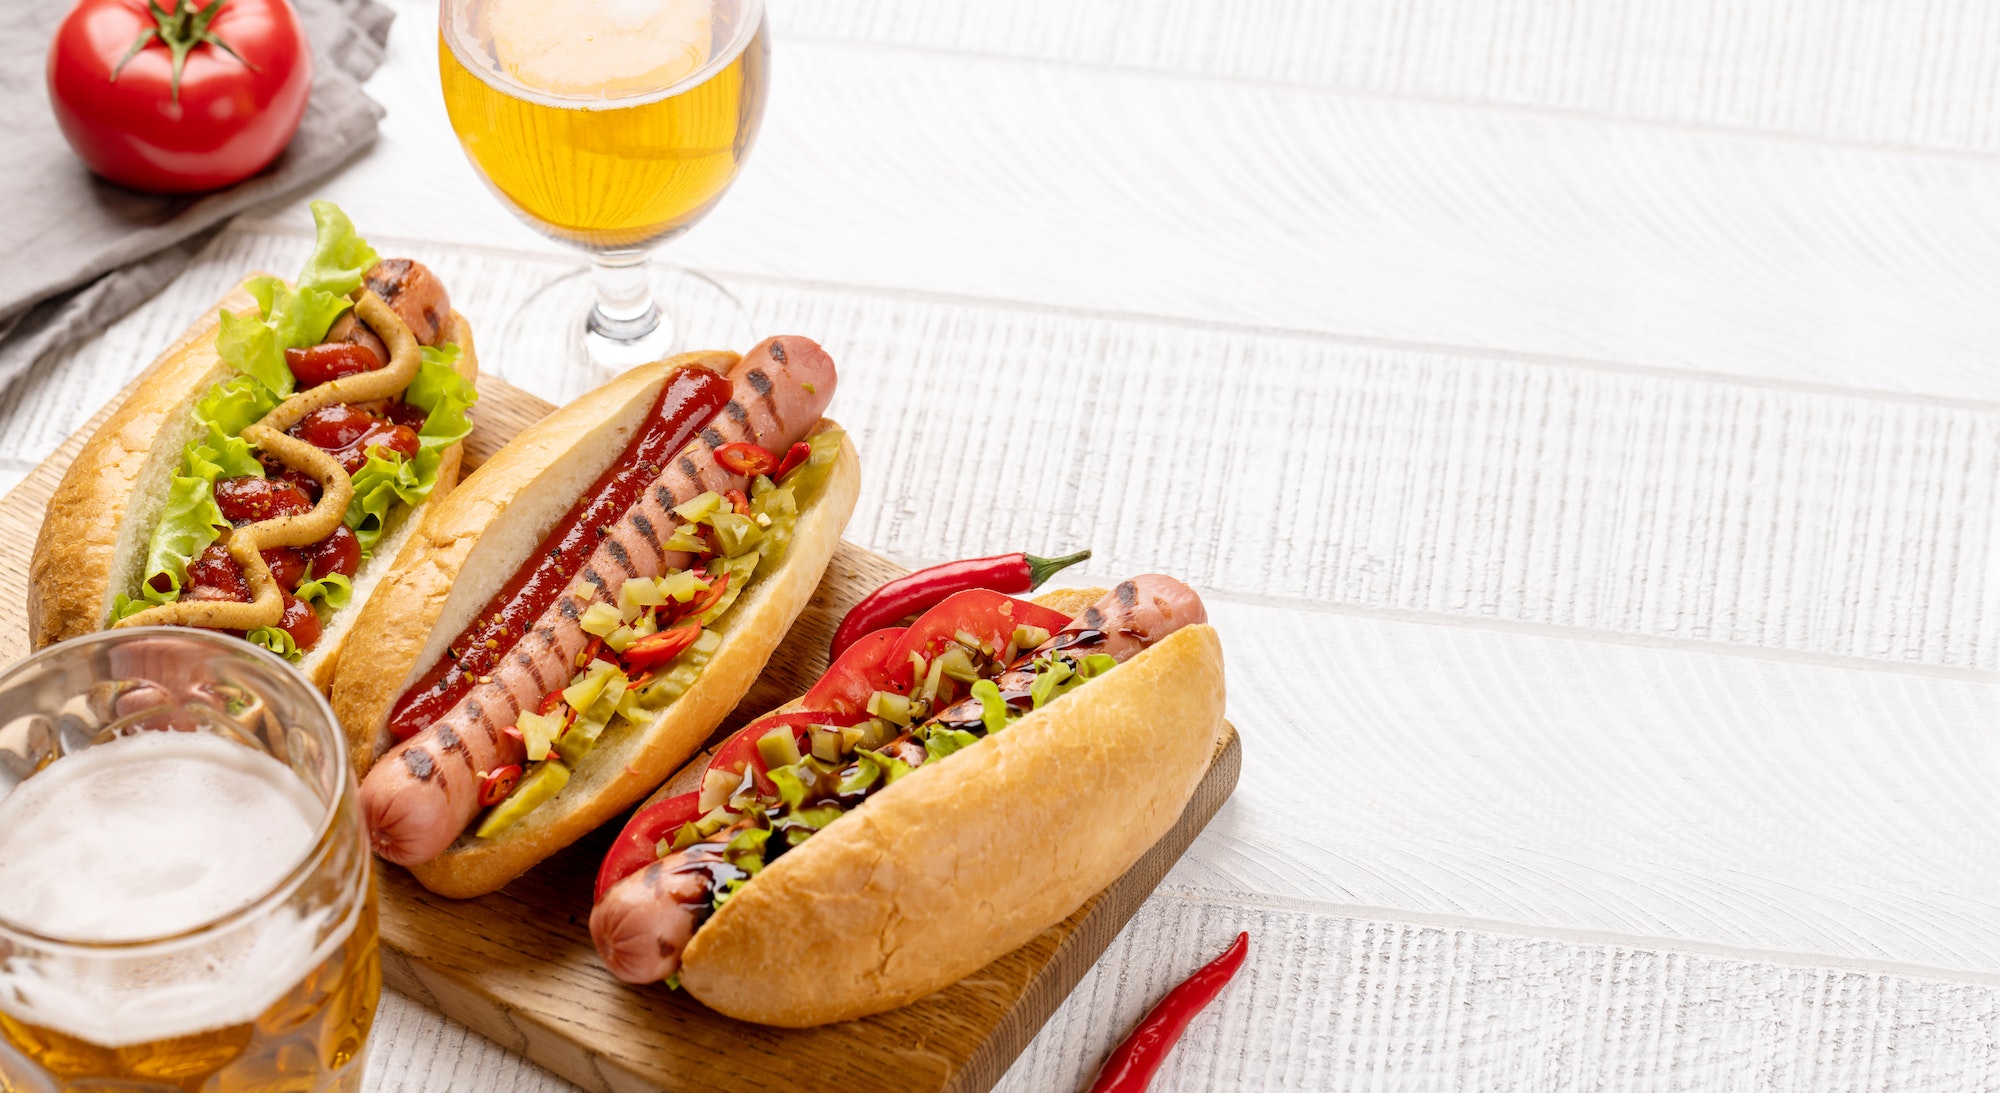 Various hot dog and beer